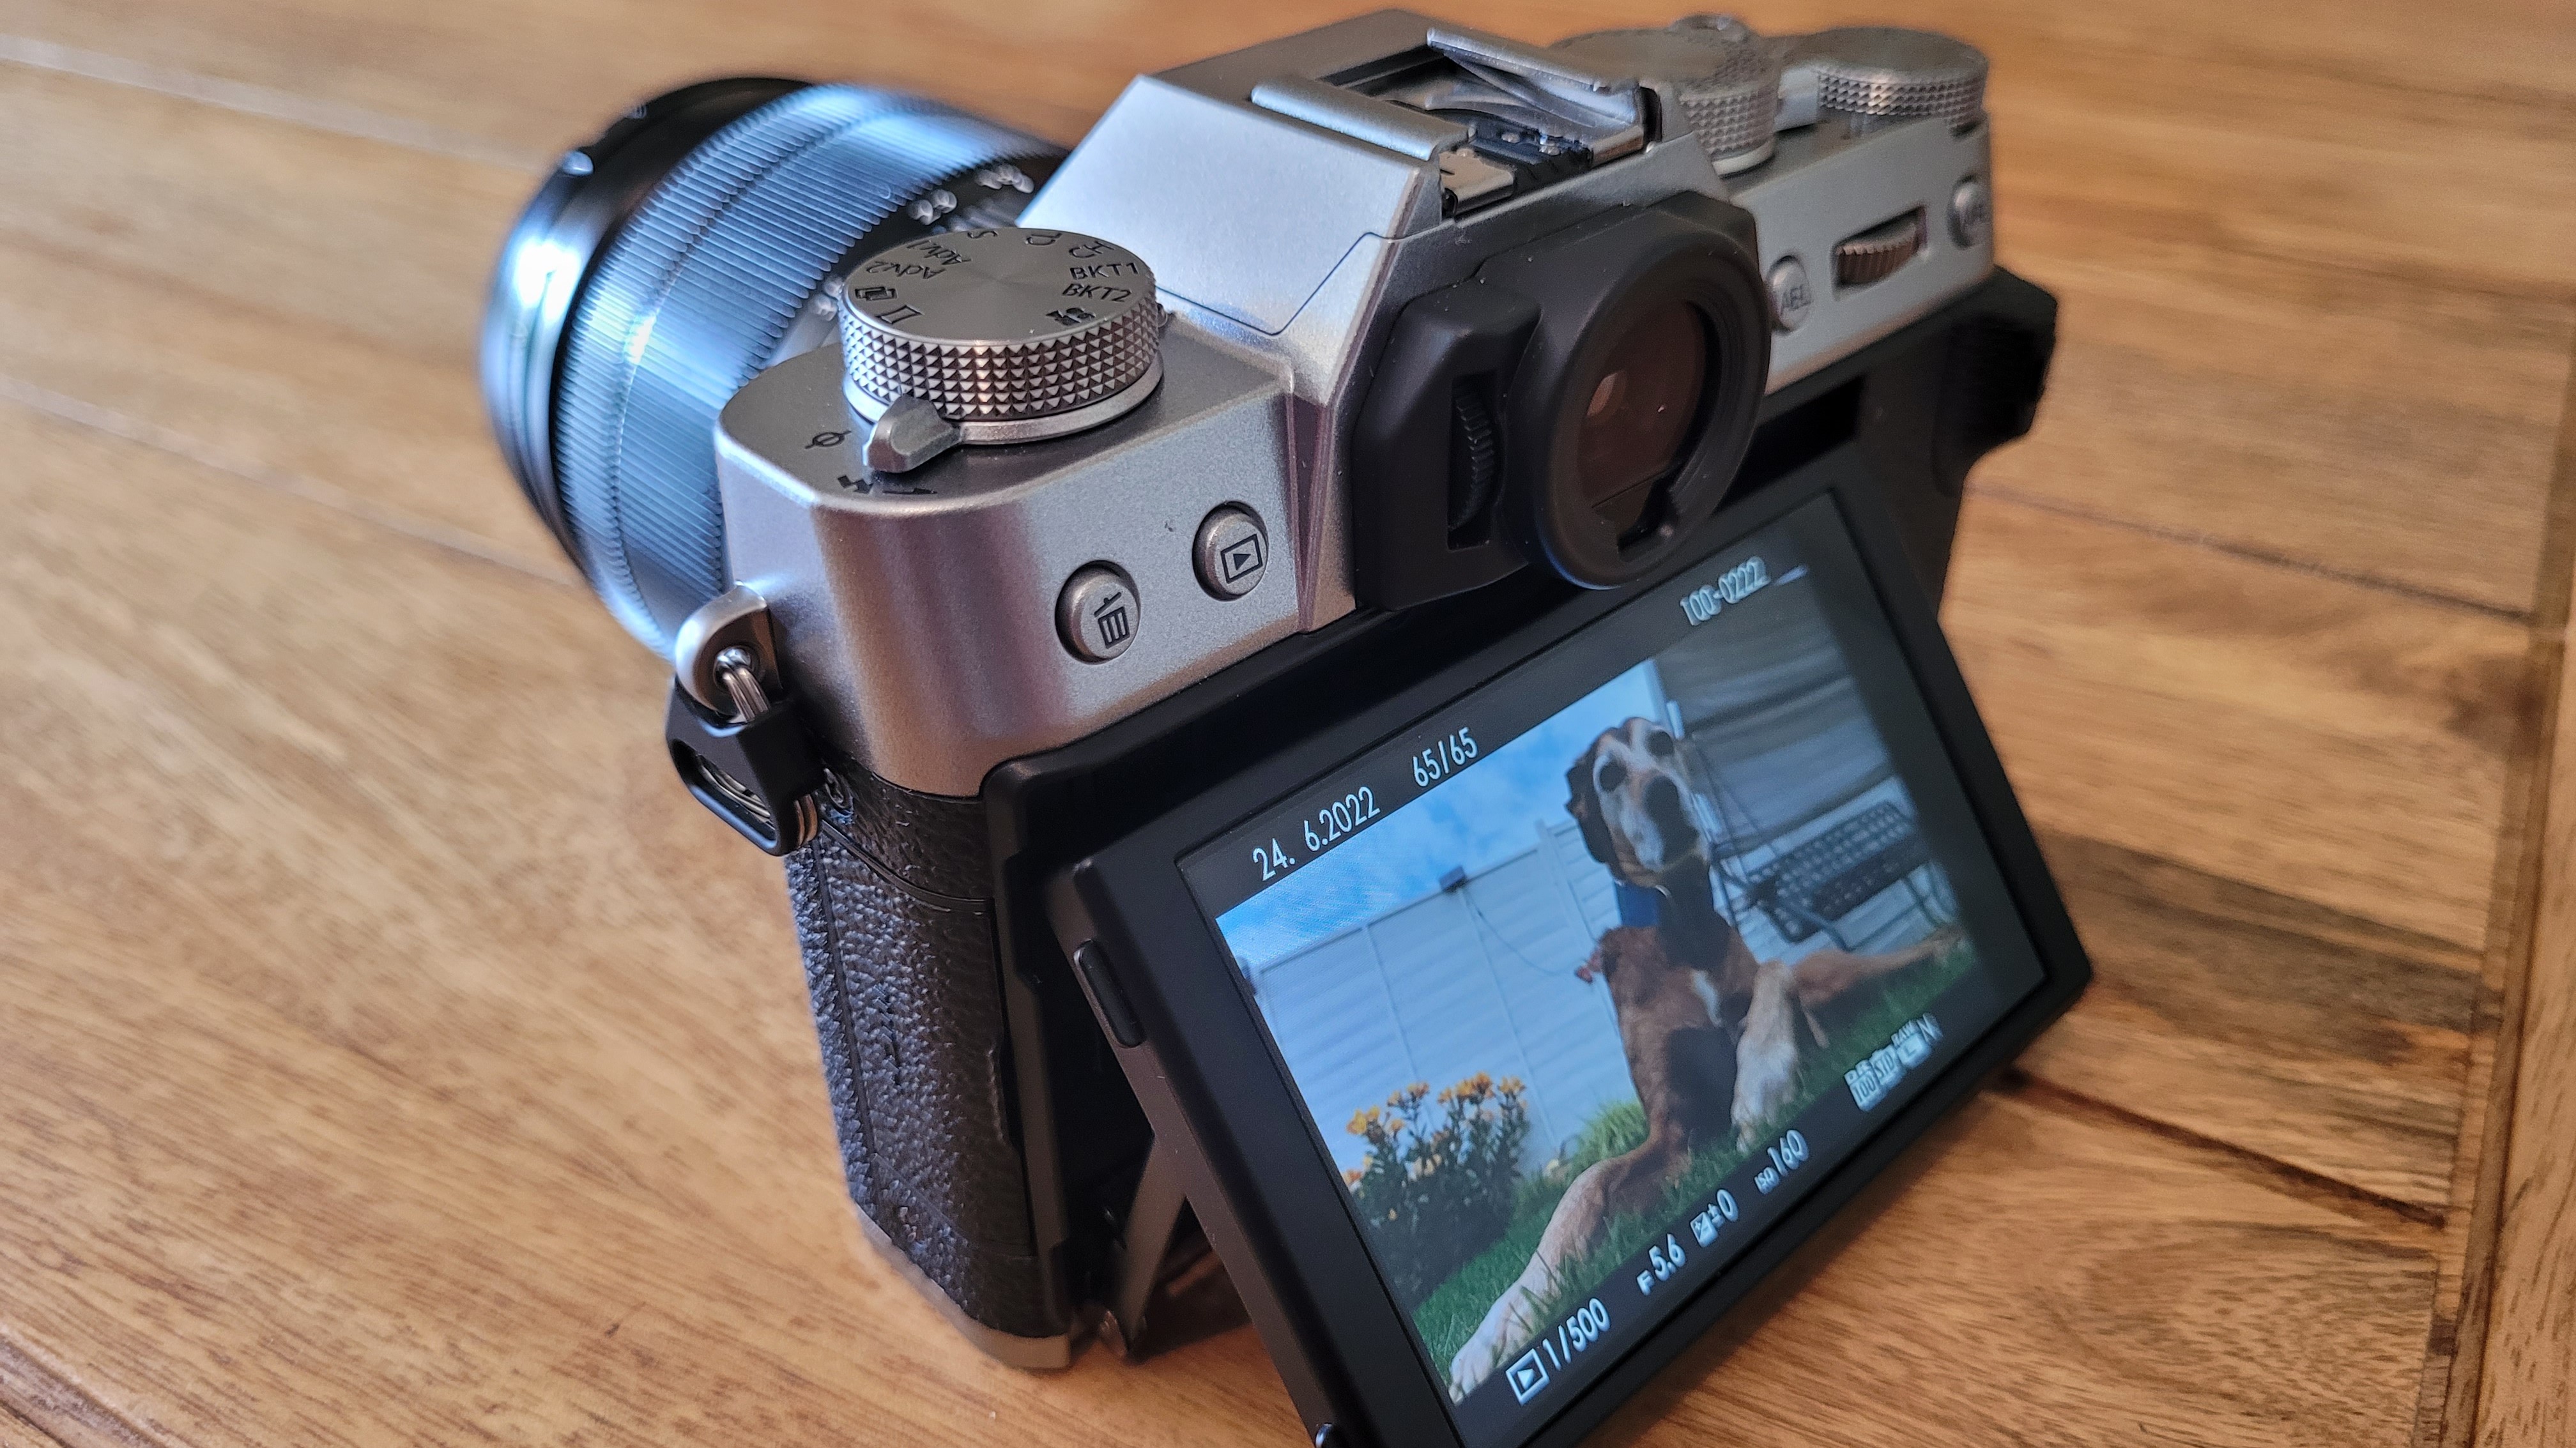 Image shows the rear of the XT-30 with the screen at a tilted angle